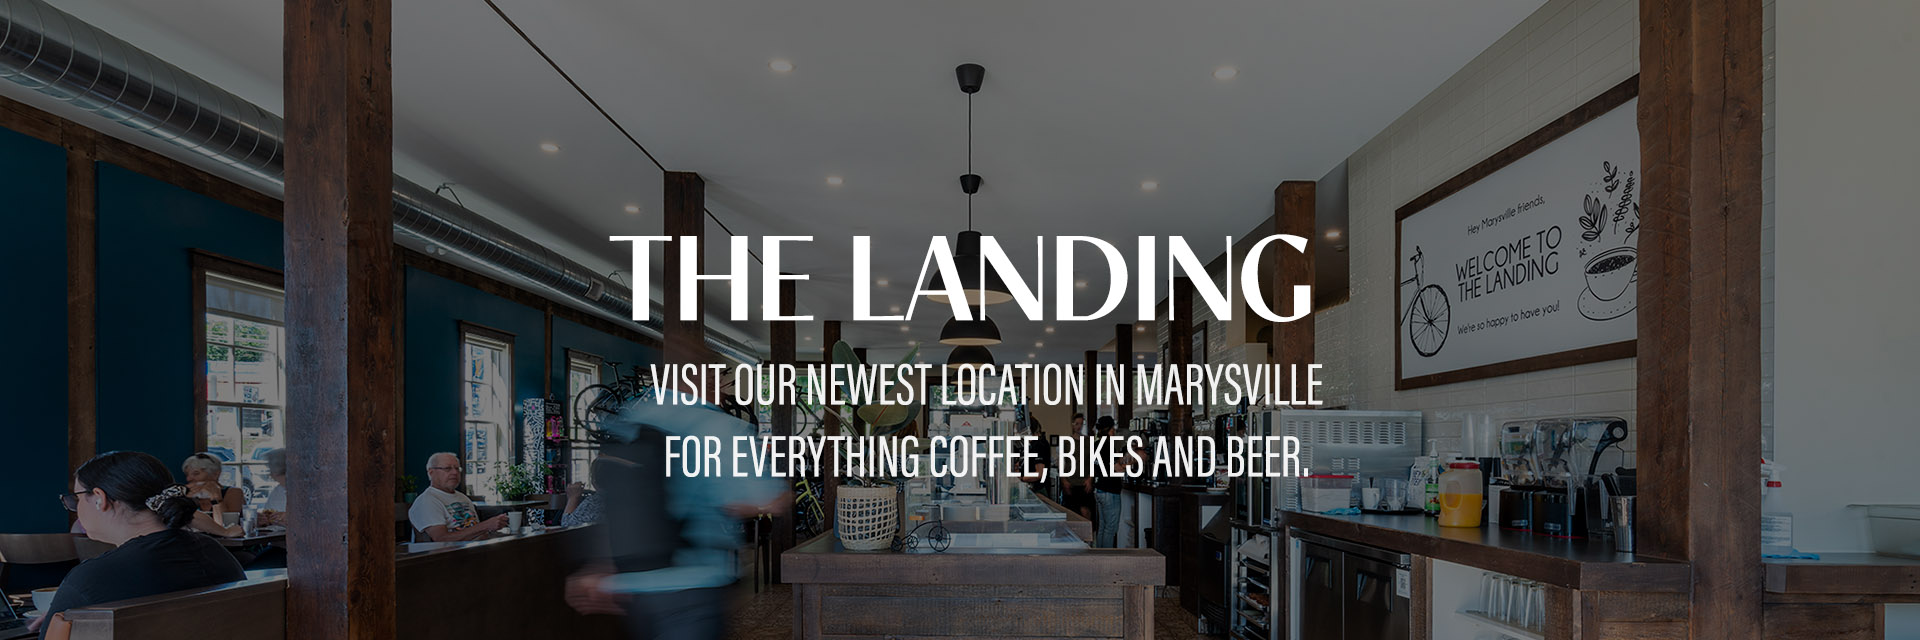 Visit our new location The Landing in Marysville - Coffee, Bikes and Beer.